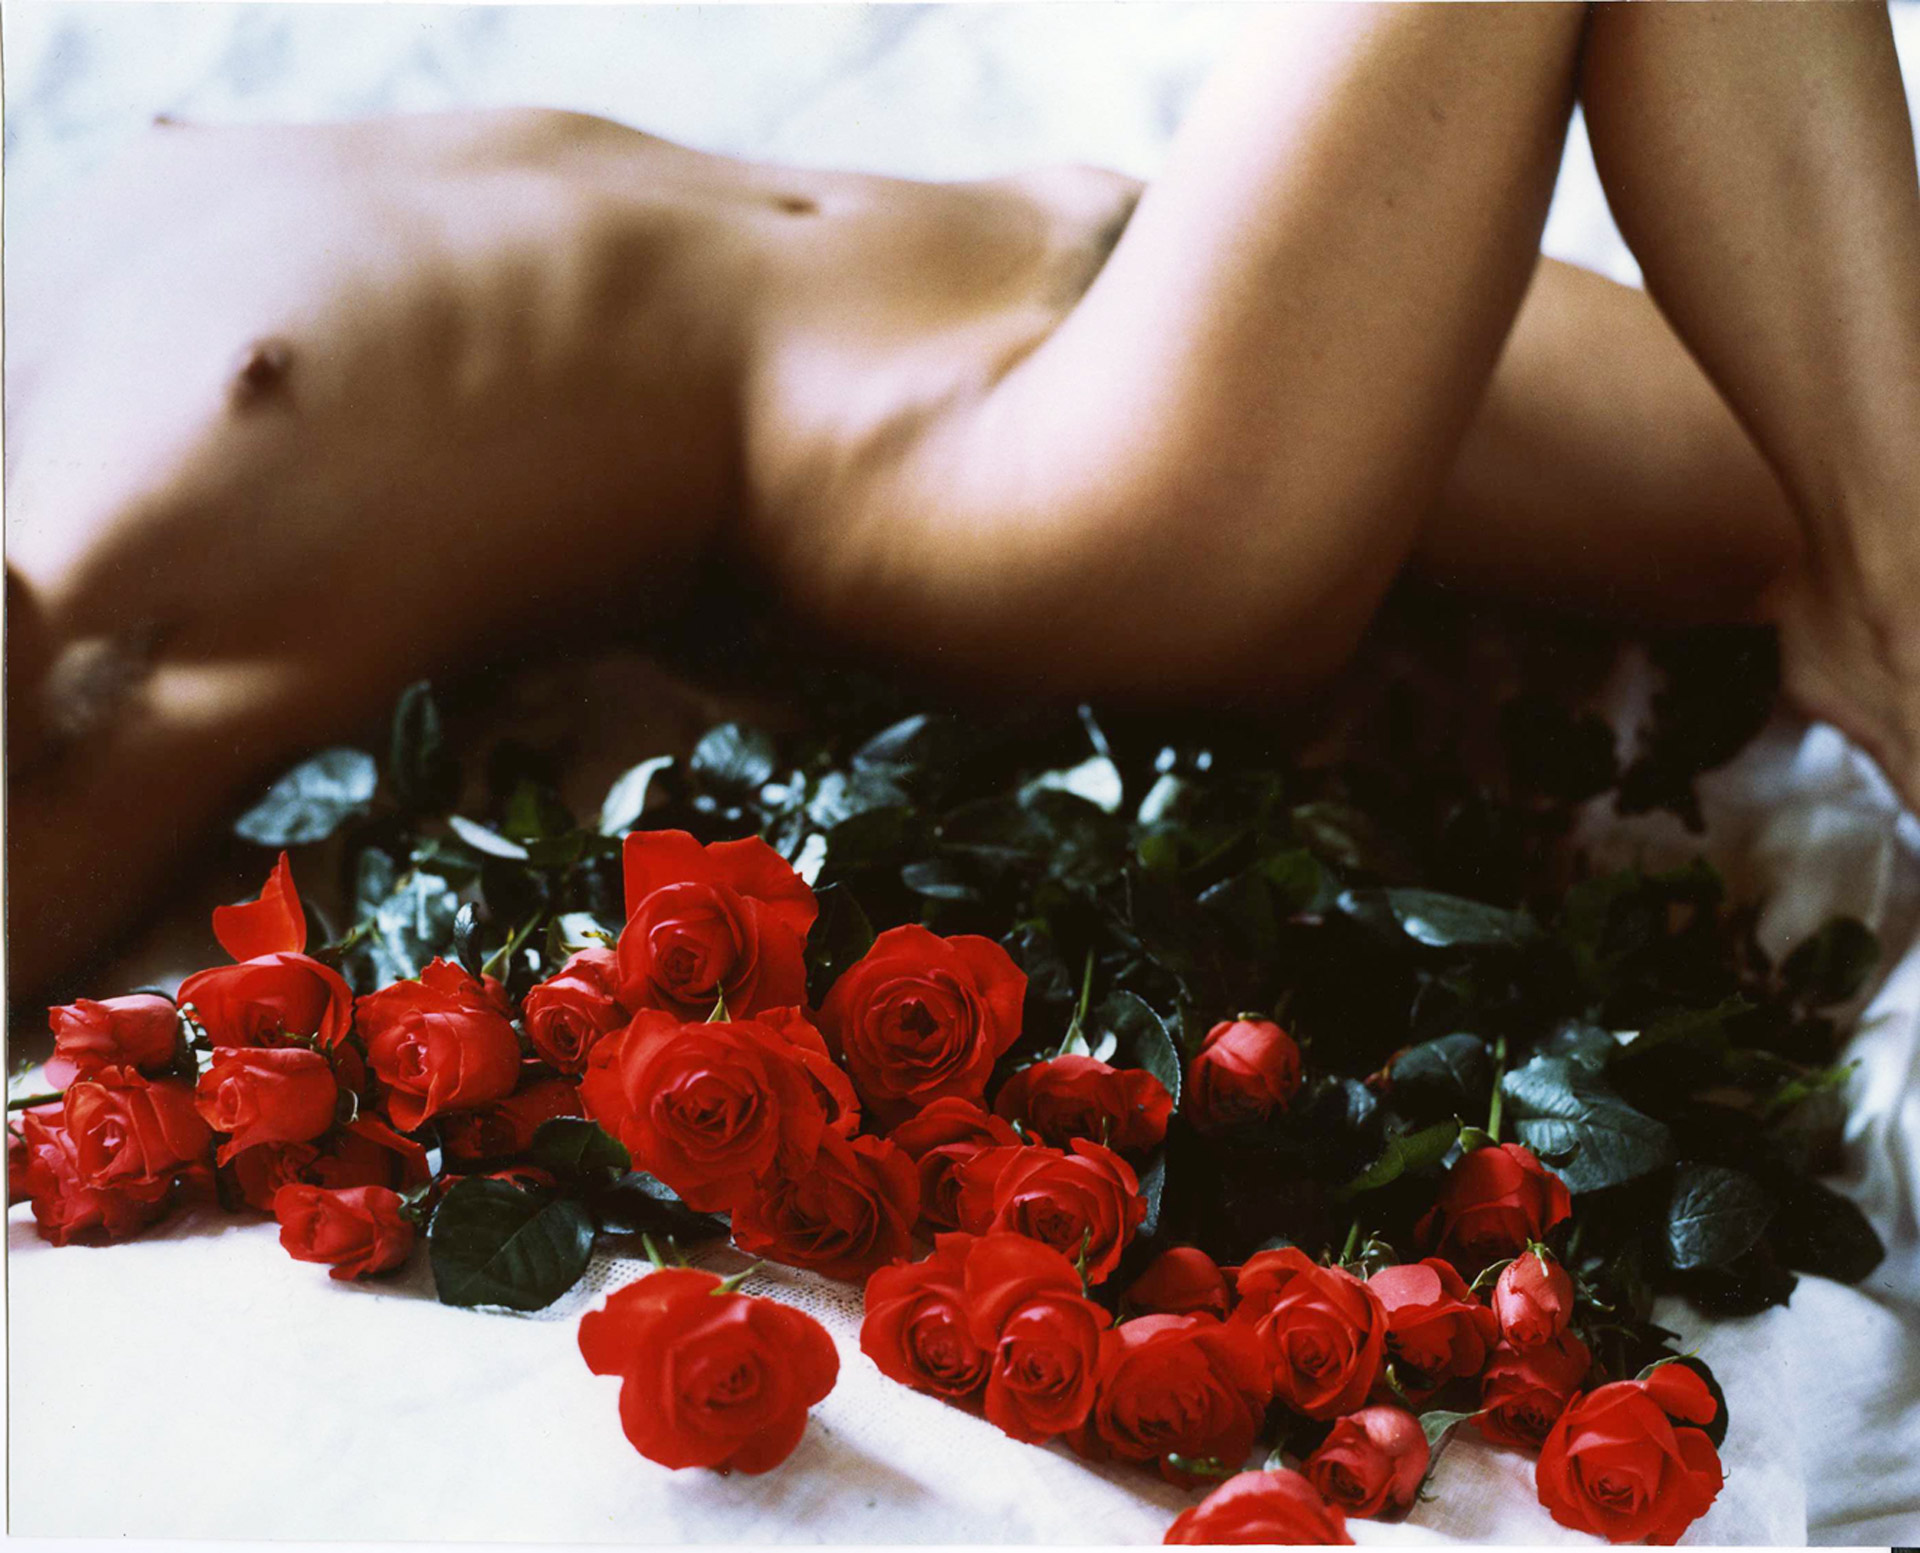 Nude with Roses, 1986